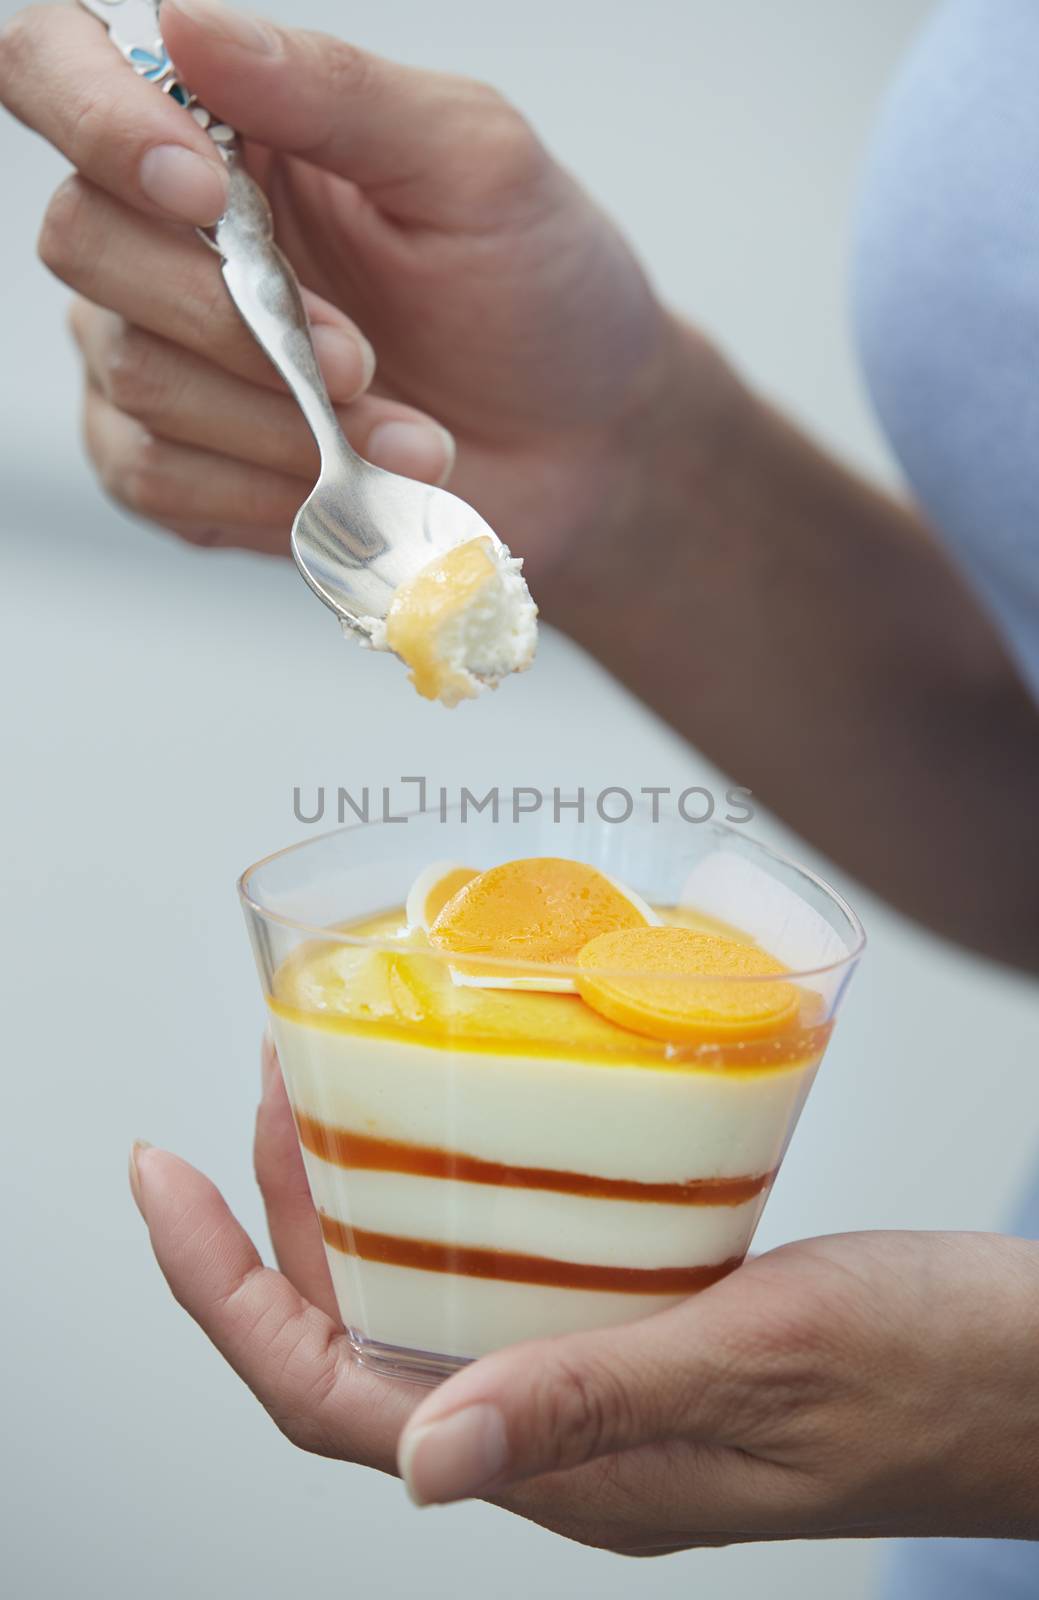 Hands of woman eating fruit mousse